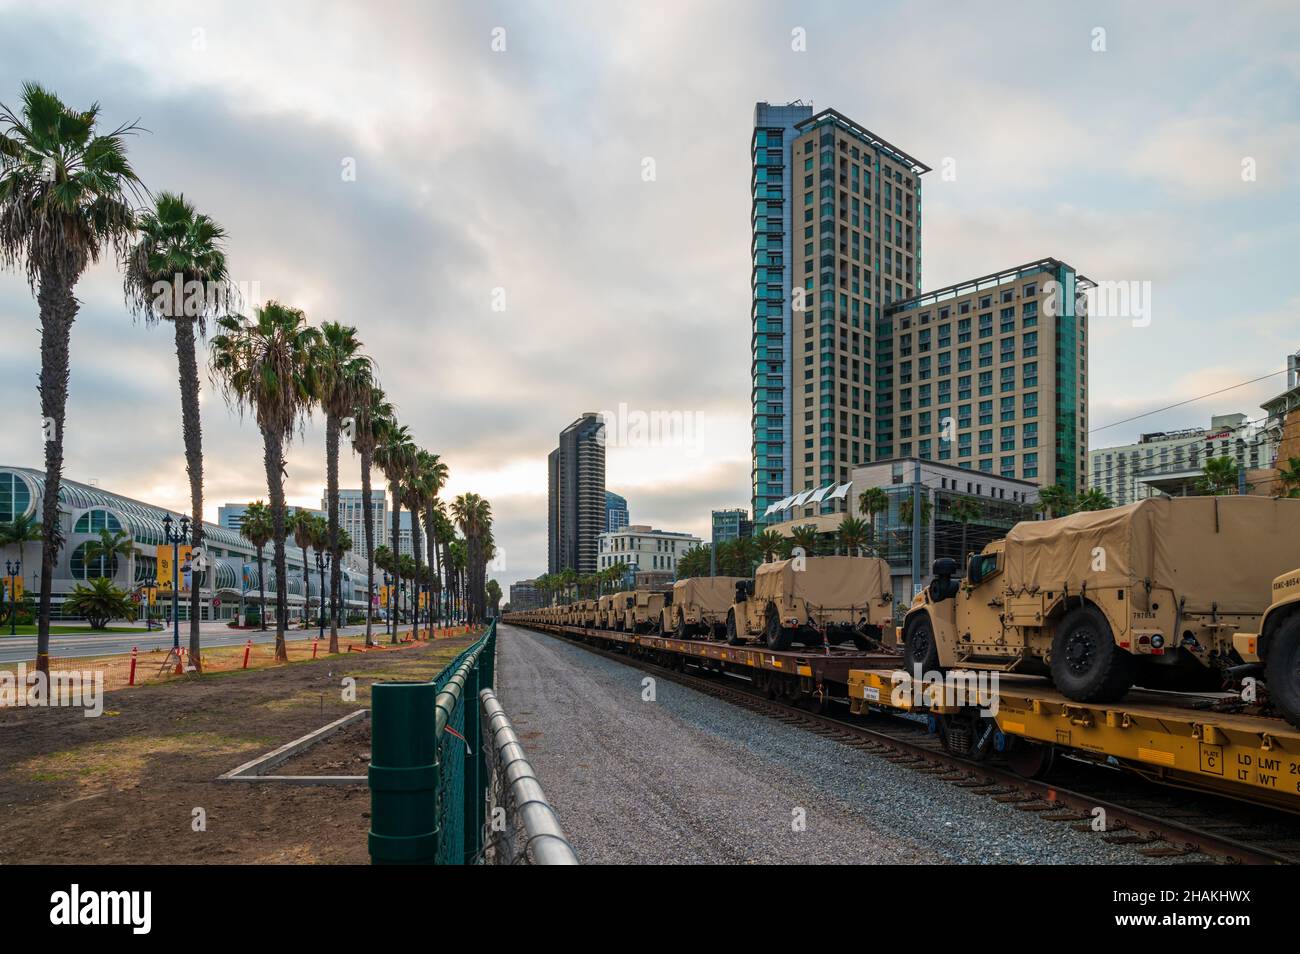 Military vehicles are transported on a train.  Stock Photo